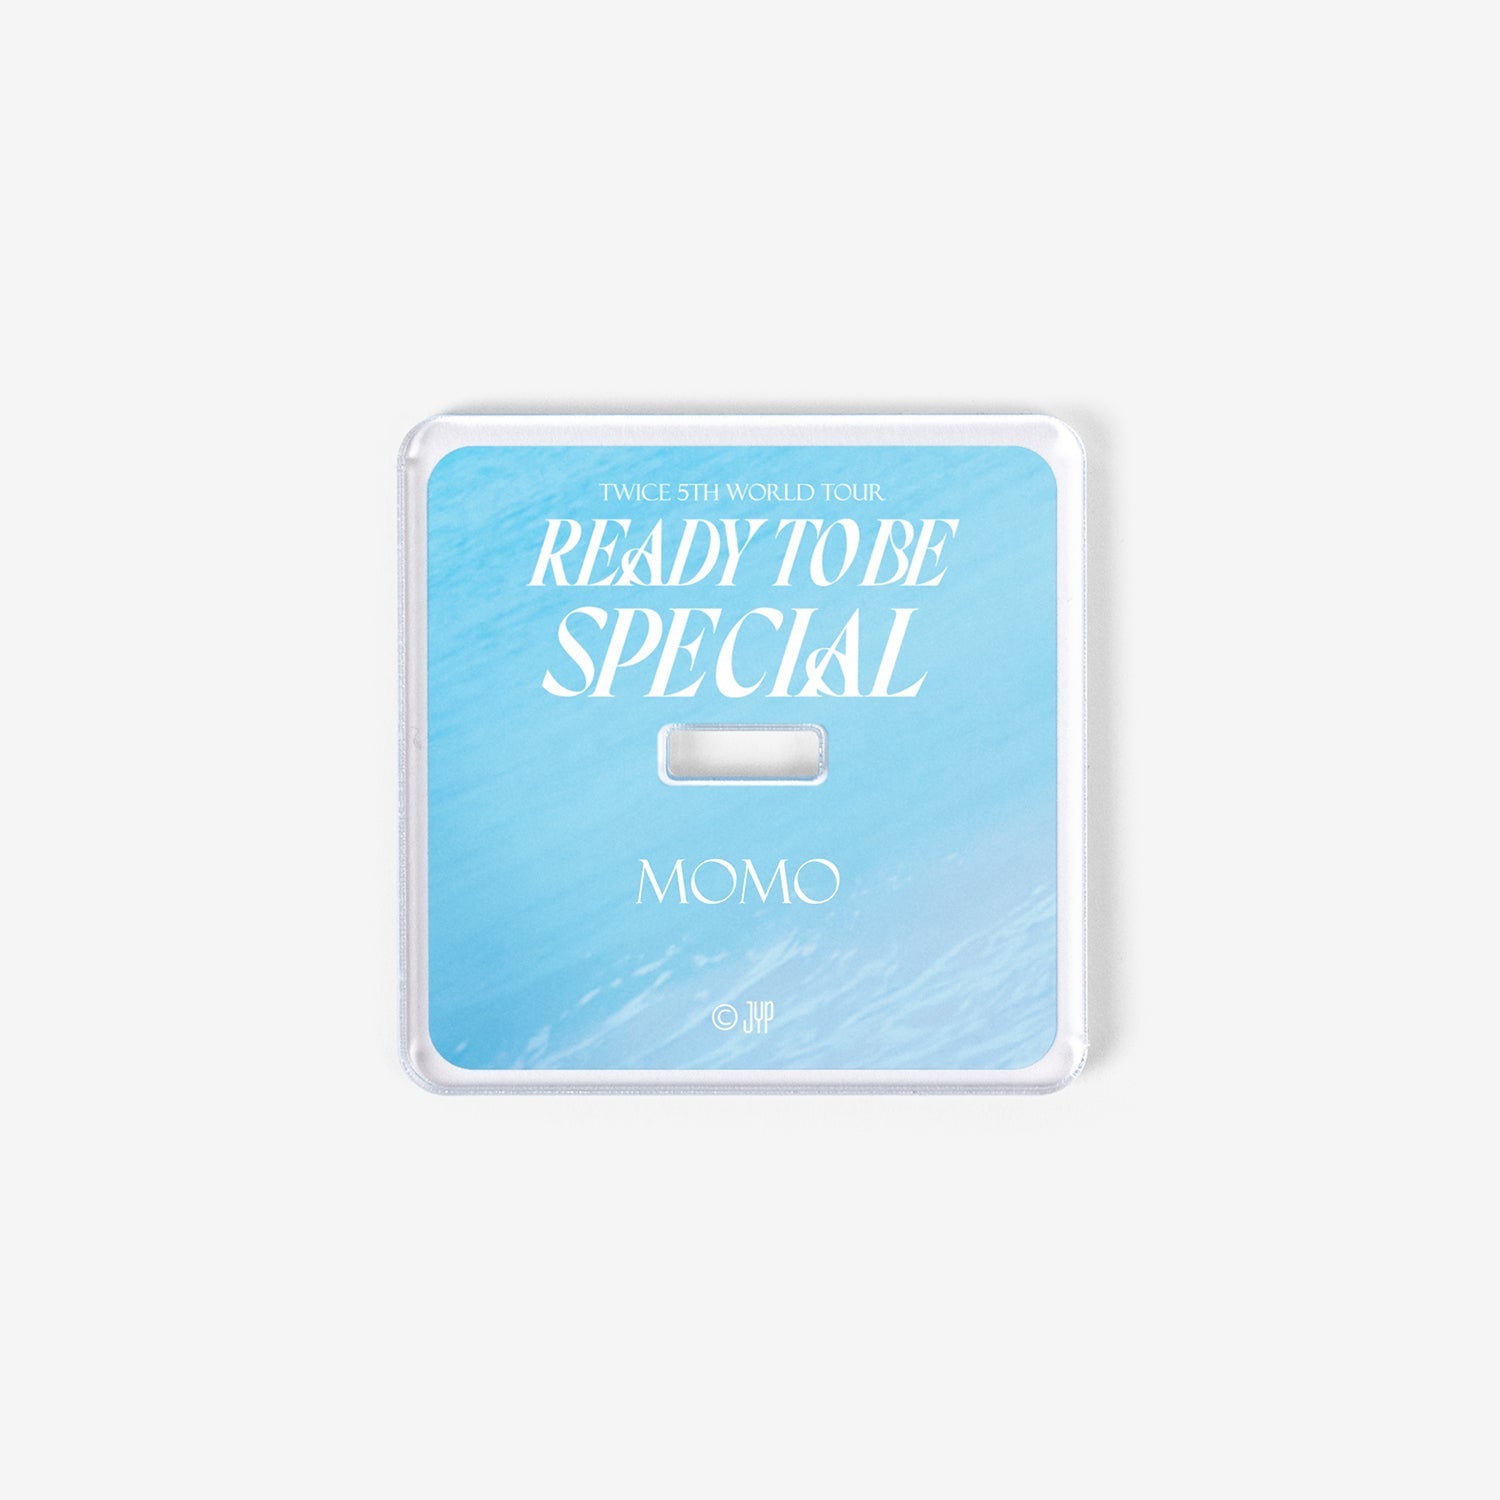 ACRYLIC STAND - MOMO【SPECIAL】/ TWICE『READY TO BE SPECIAL』